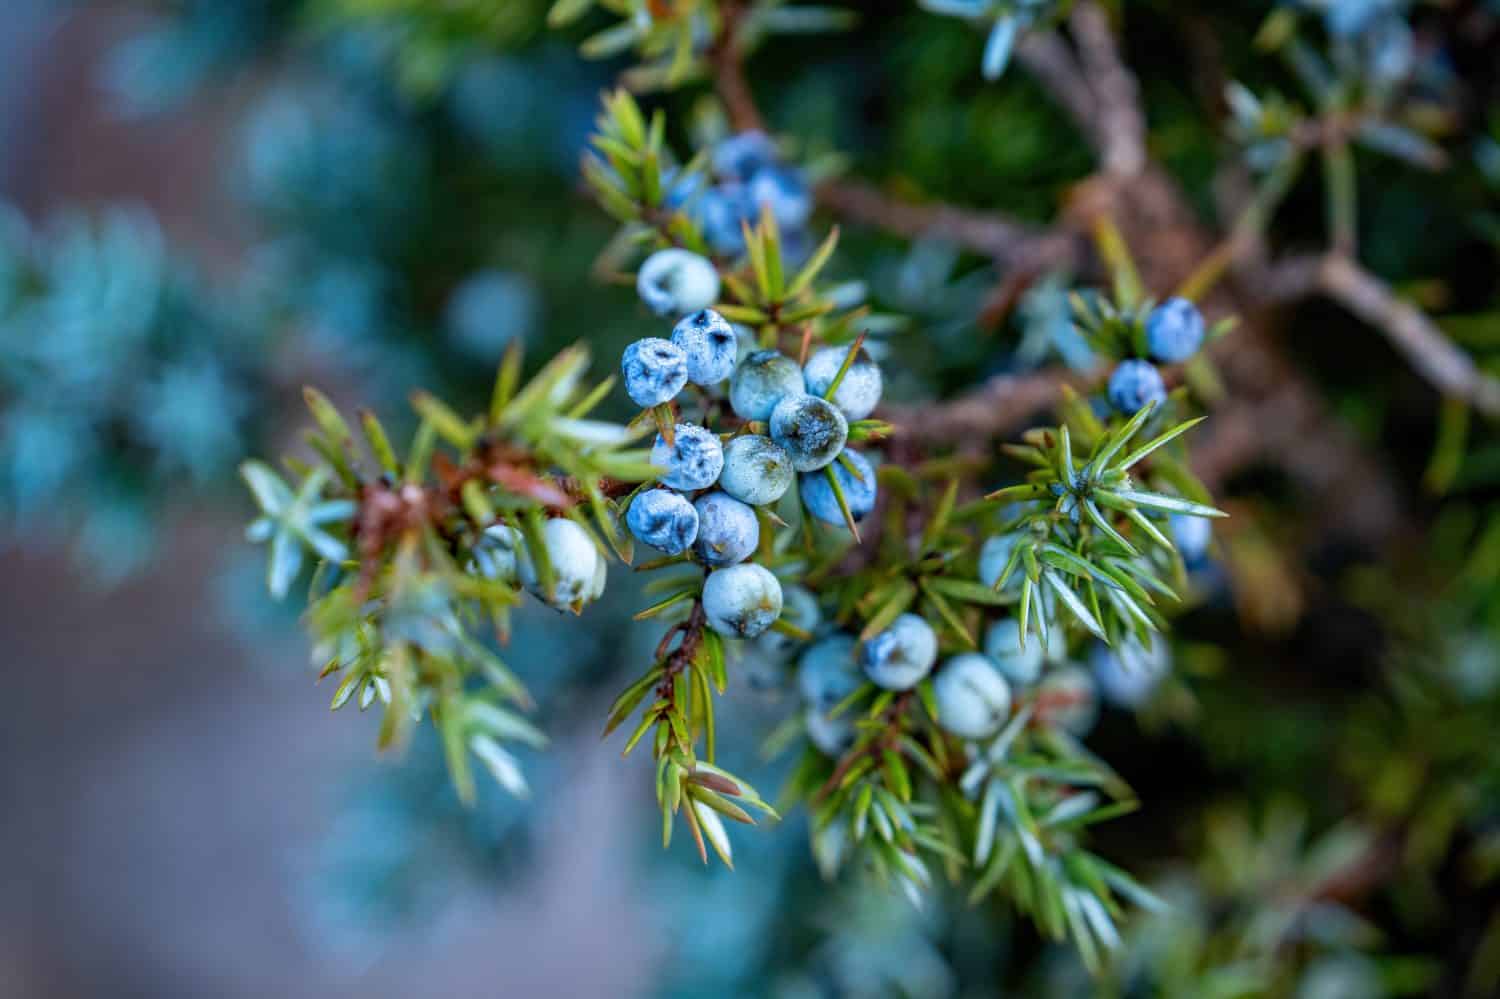 juniper a special spice from the forest